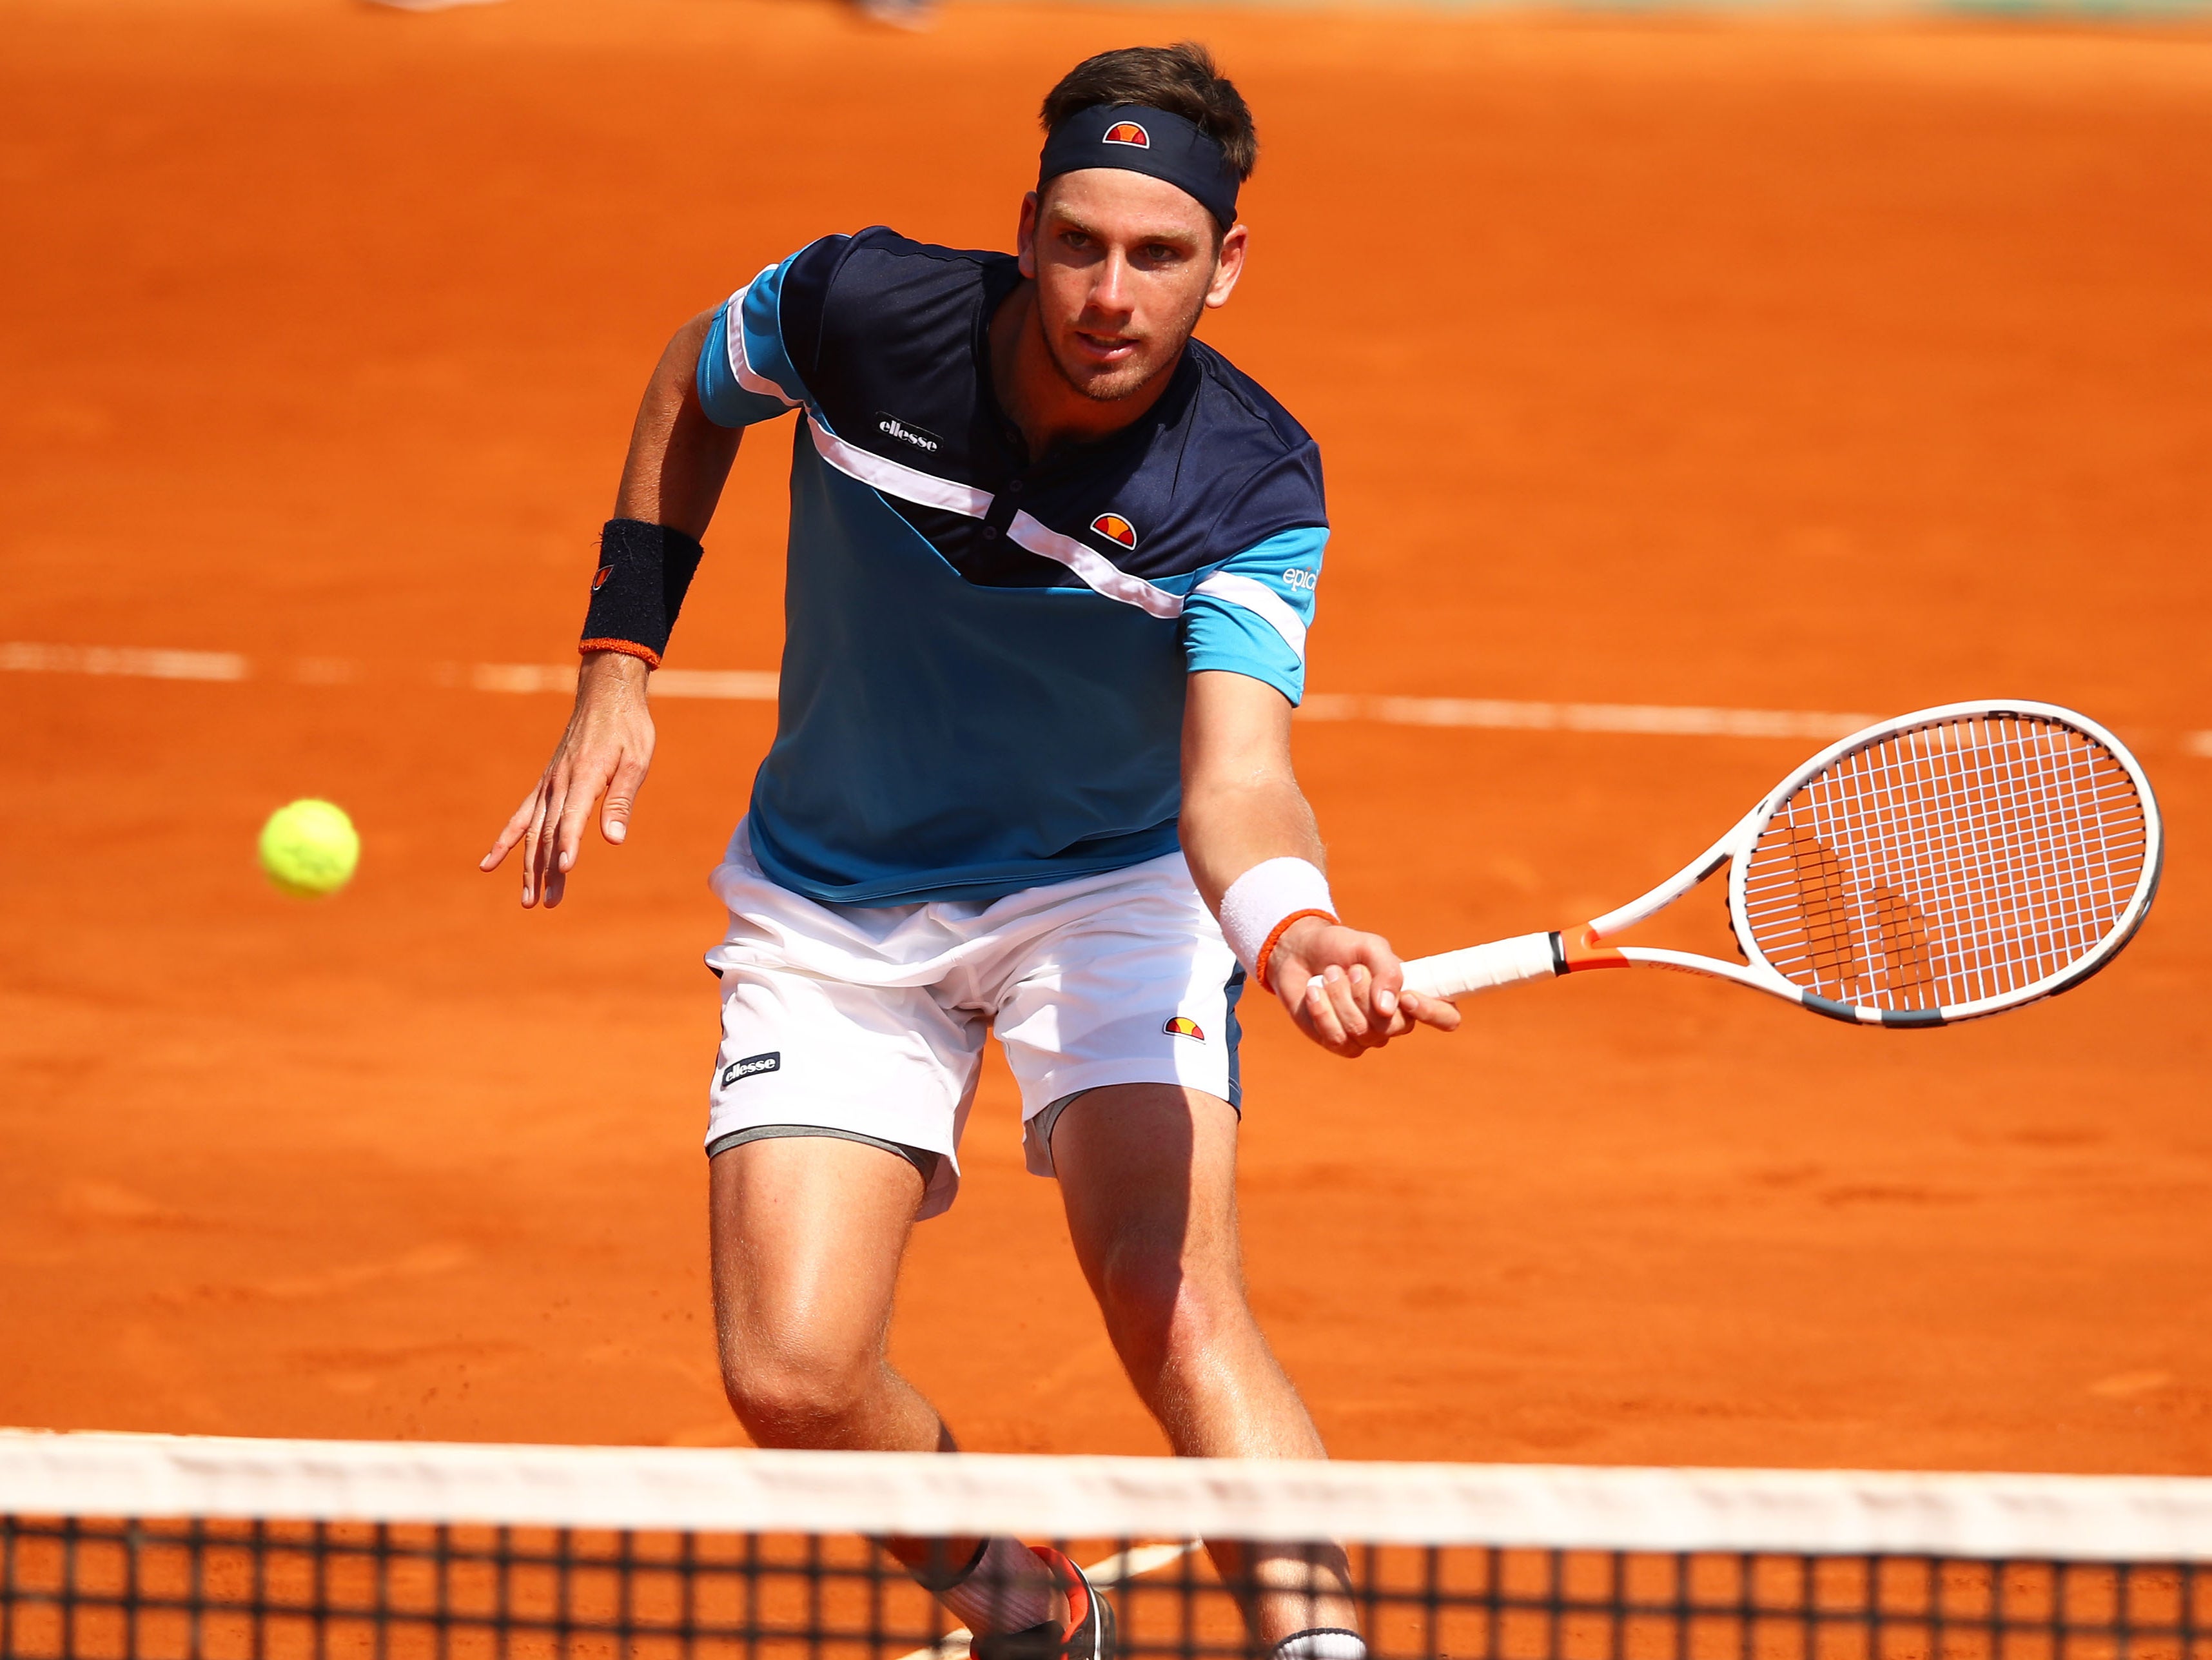 British No 1 Cameron Norrie enters his first tournament as a top-10 player